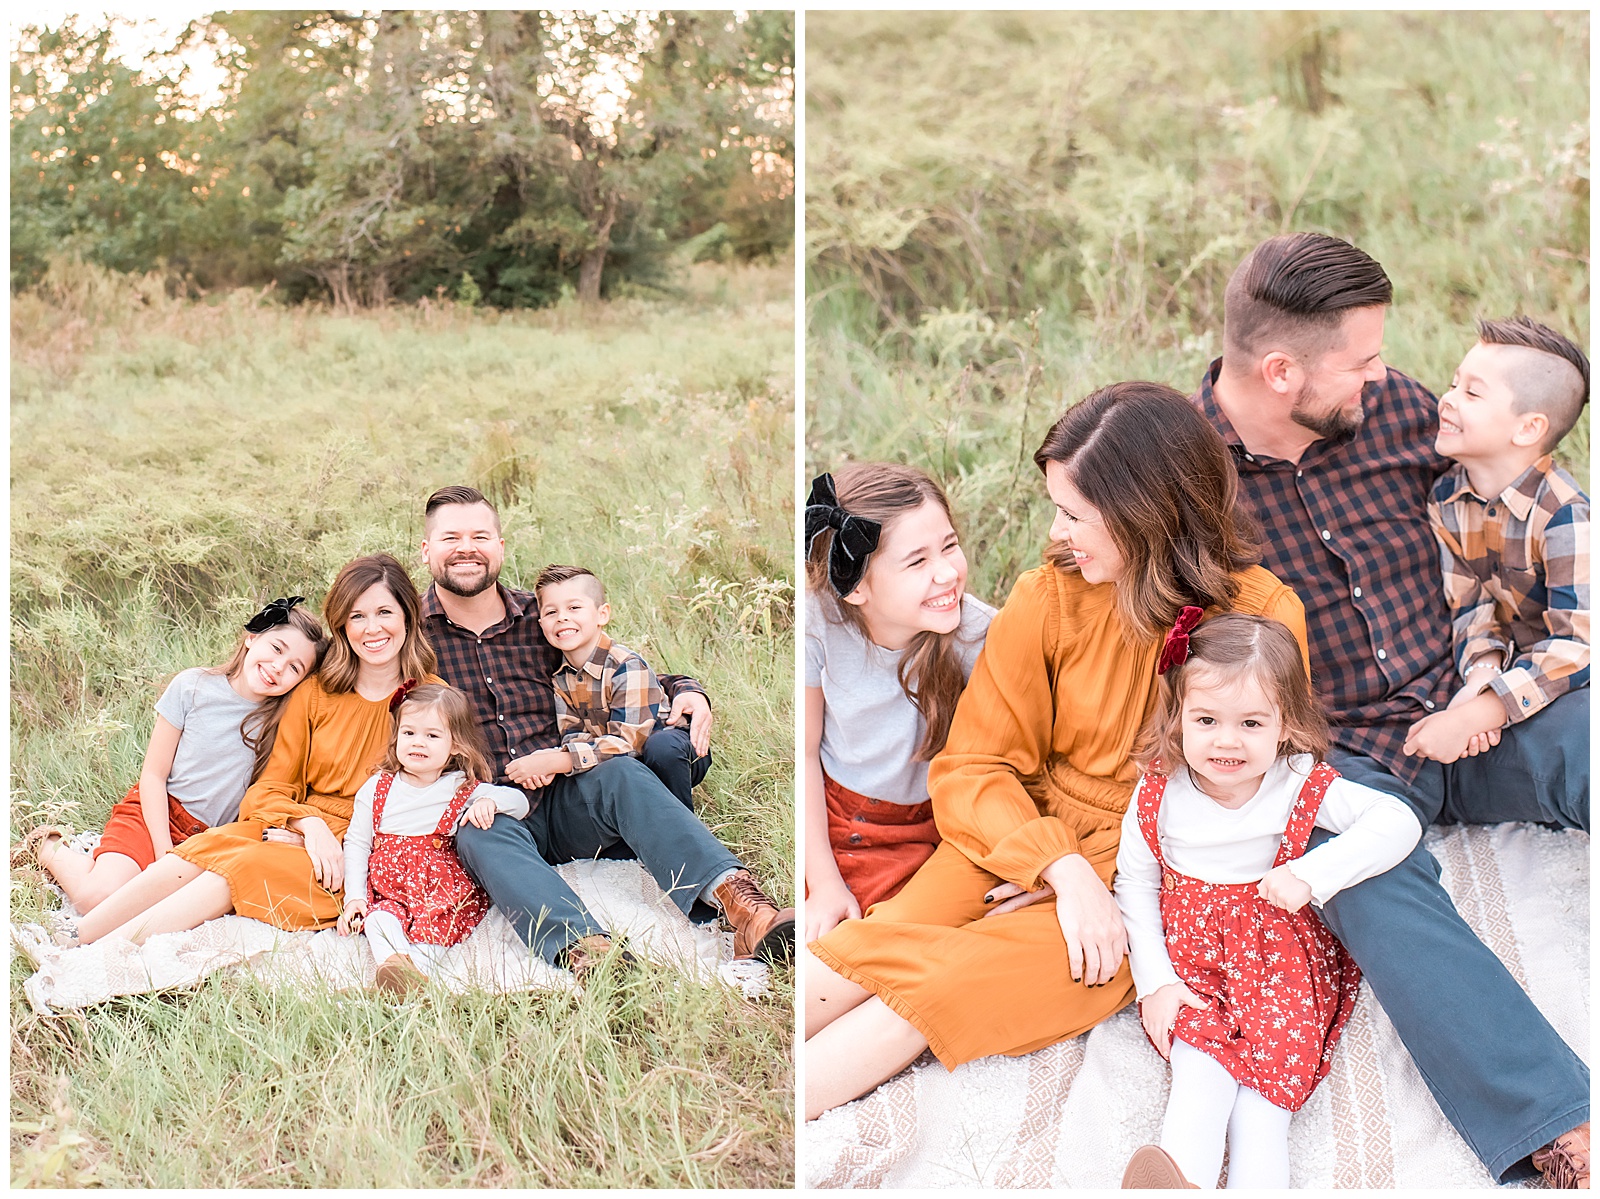 Best Family Photographer, The Woodlands Texas 